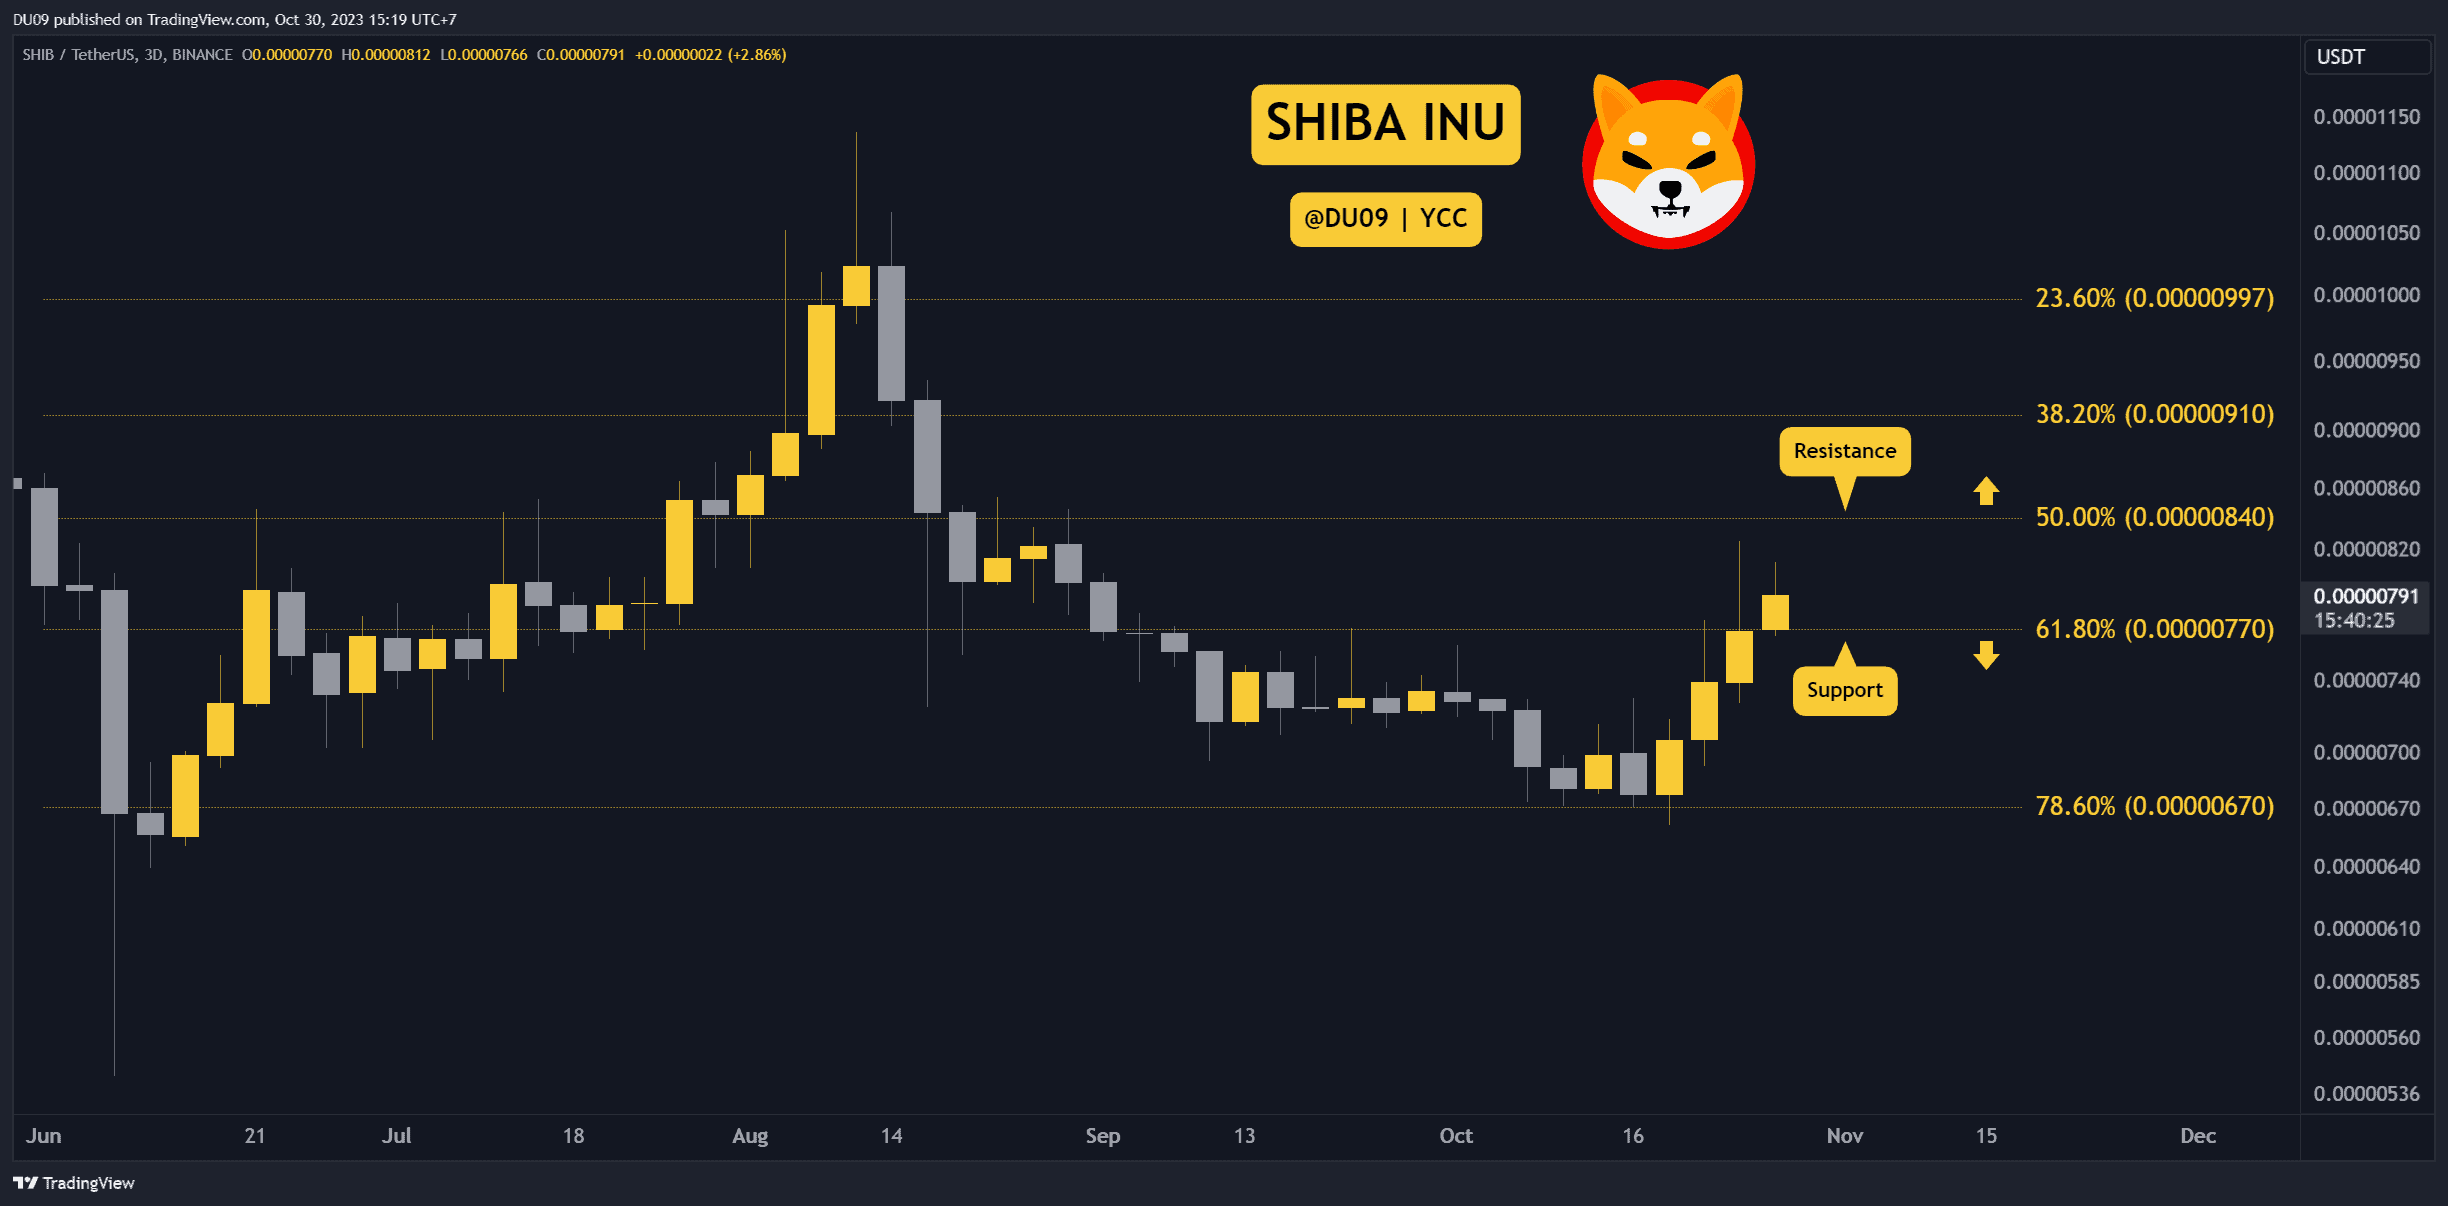 Shib-skyrockets-12%-weekly-but-is-a-correction-coming-this-week?-3-things-to-watch-(shiba-inu-price-analysis)